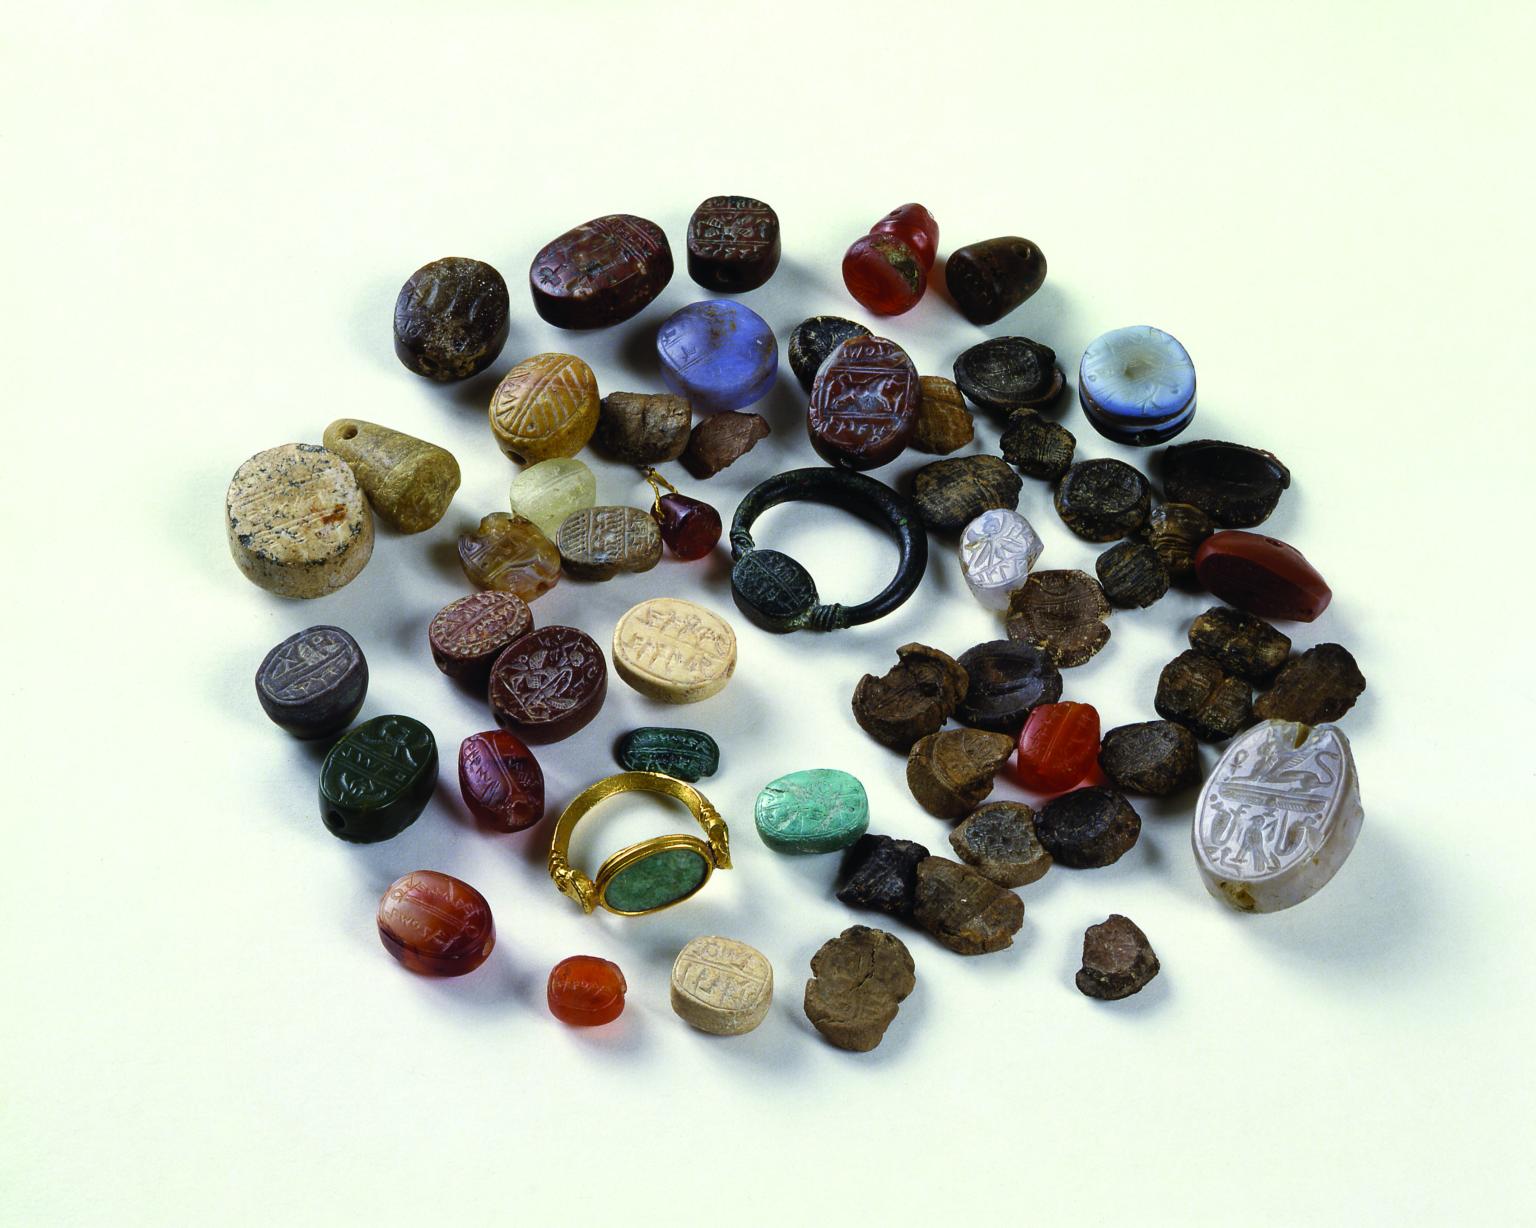 Inscribed seals of various sizes and shapes, mostly made of semi-precious stone, including two that are set in rings.